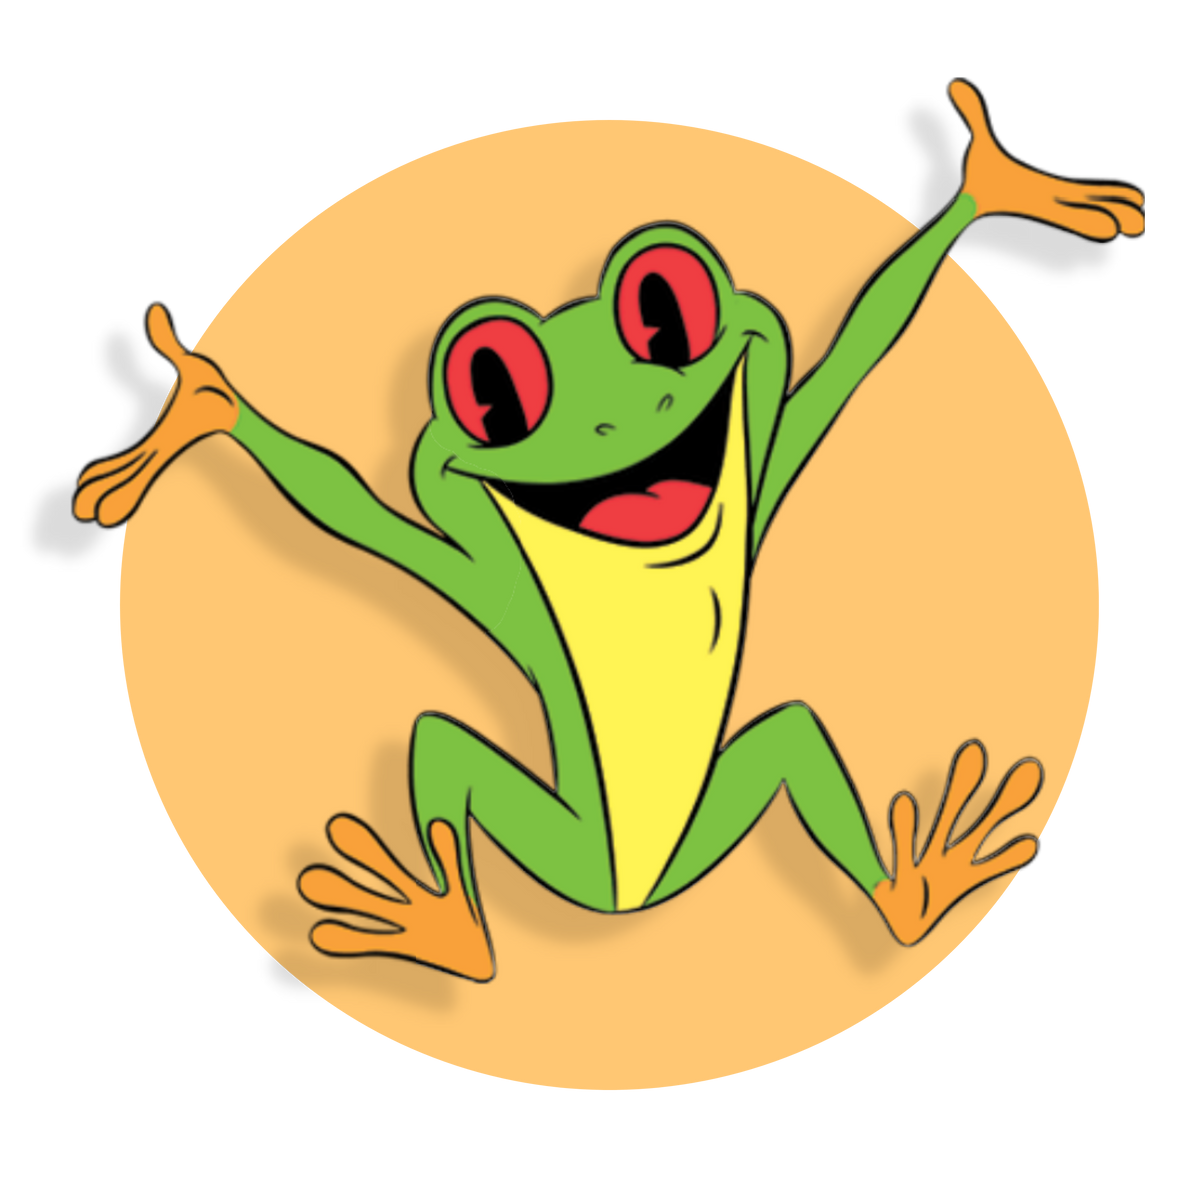 a cartoon character of a green frog with red eyes, sporting a big smile. It appears to be in a joyful pose with its arms and legs spread out, possibly in mid-jump or as if it’s ready to give someone a hug. The frog is centered against a simple light brown circular background that accentuates its figure. 